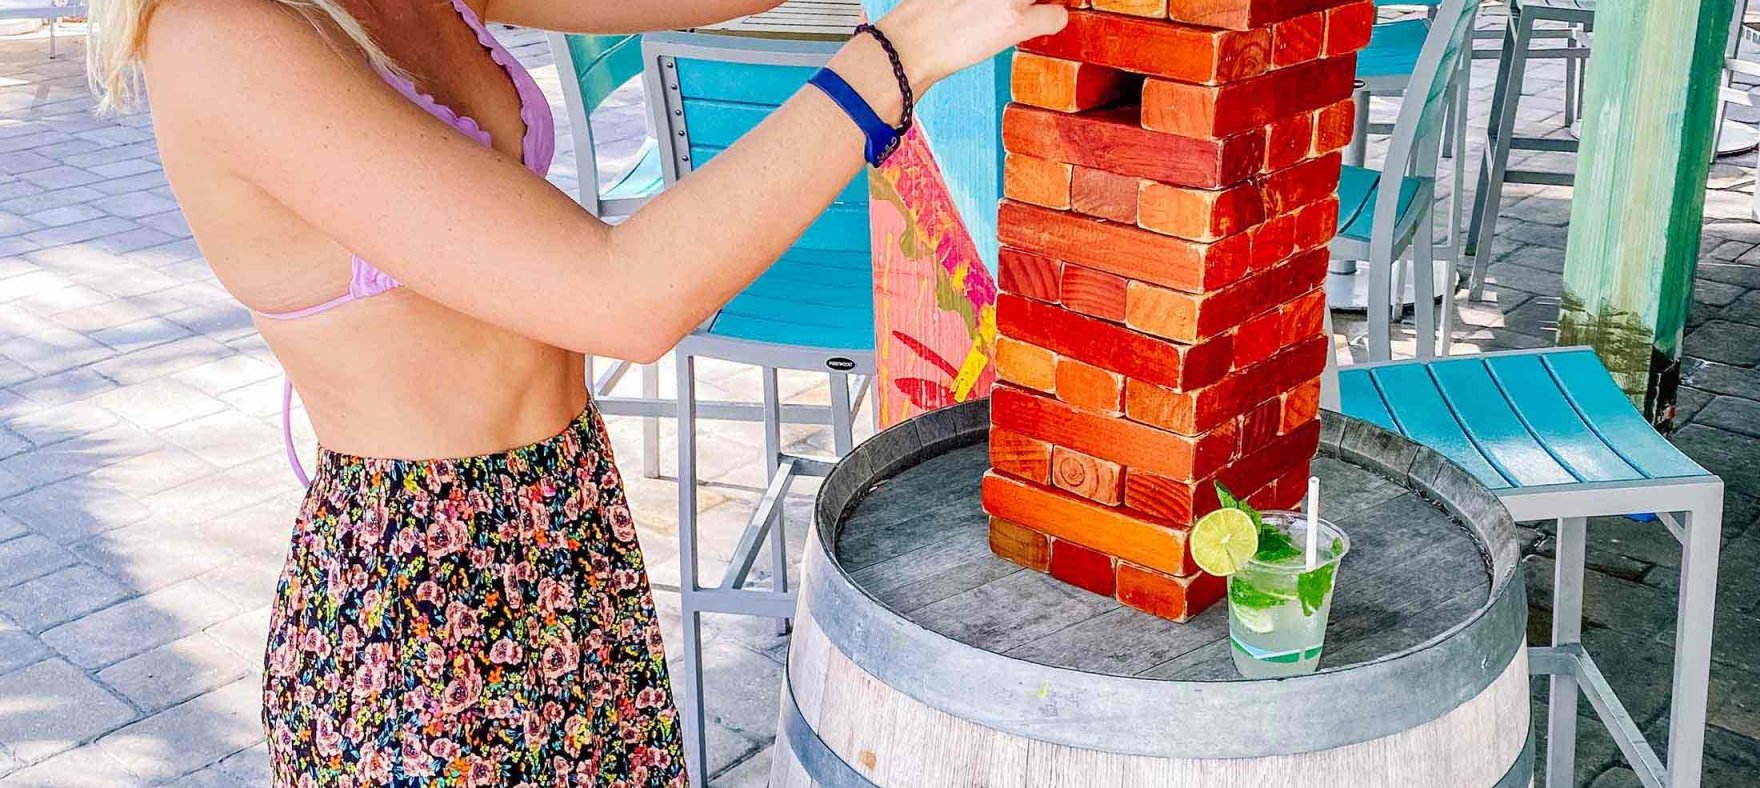 A vertical shot of a woman building a structure with mini bricks on top of a wooden barrel